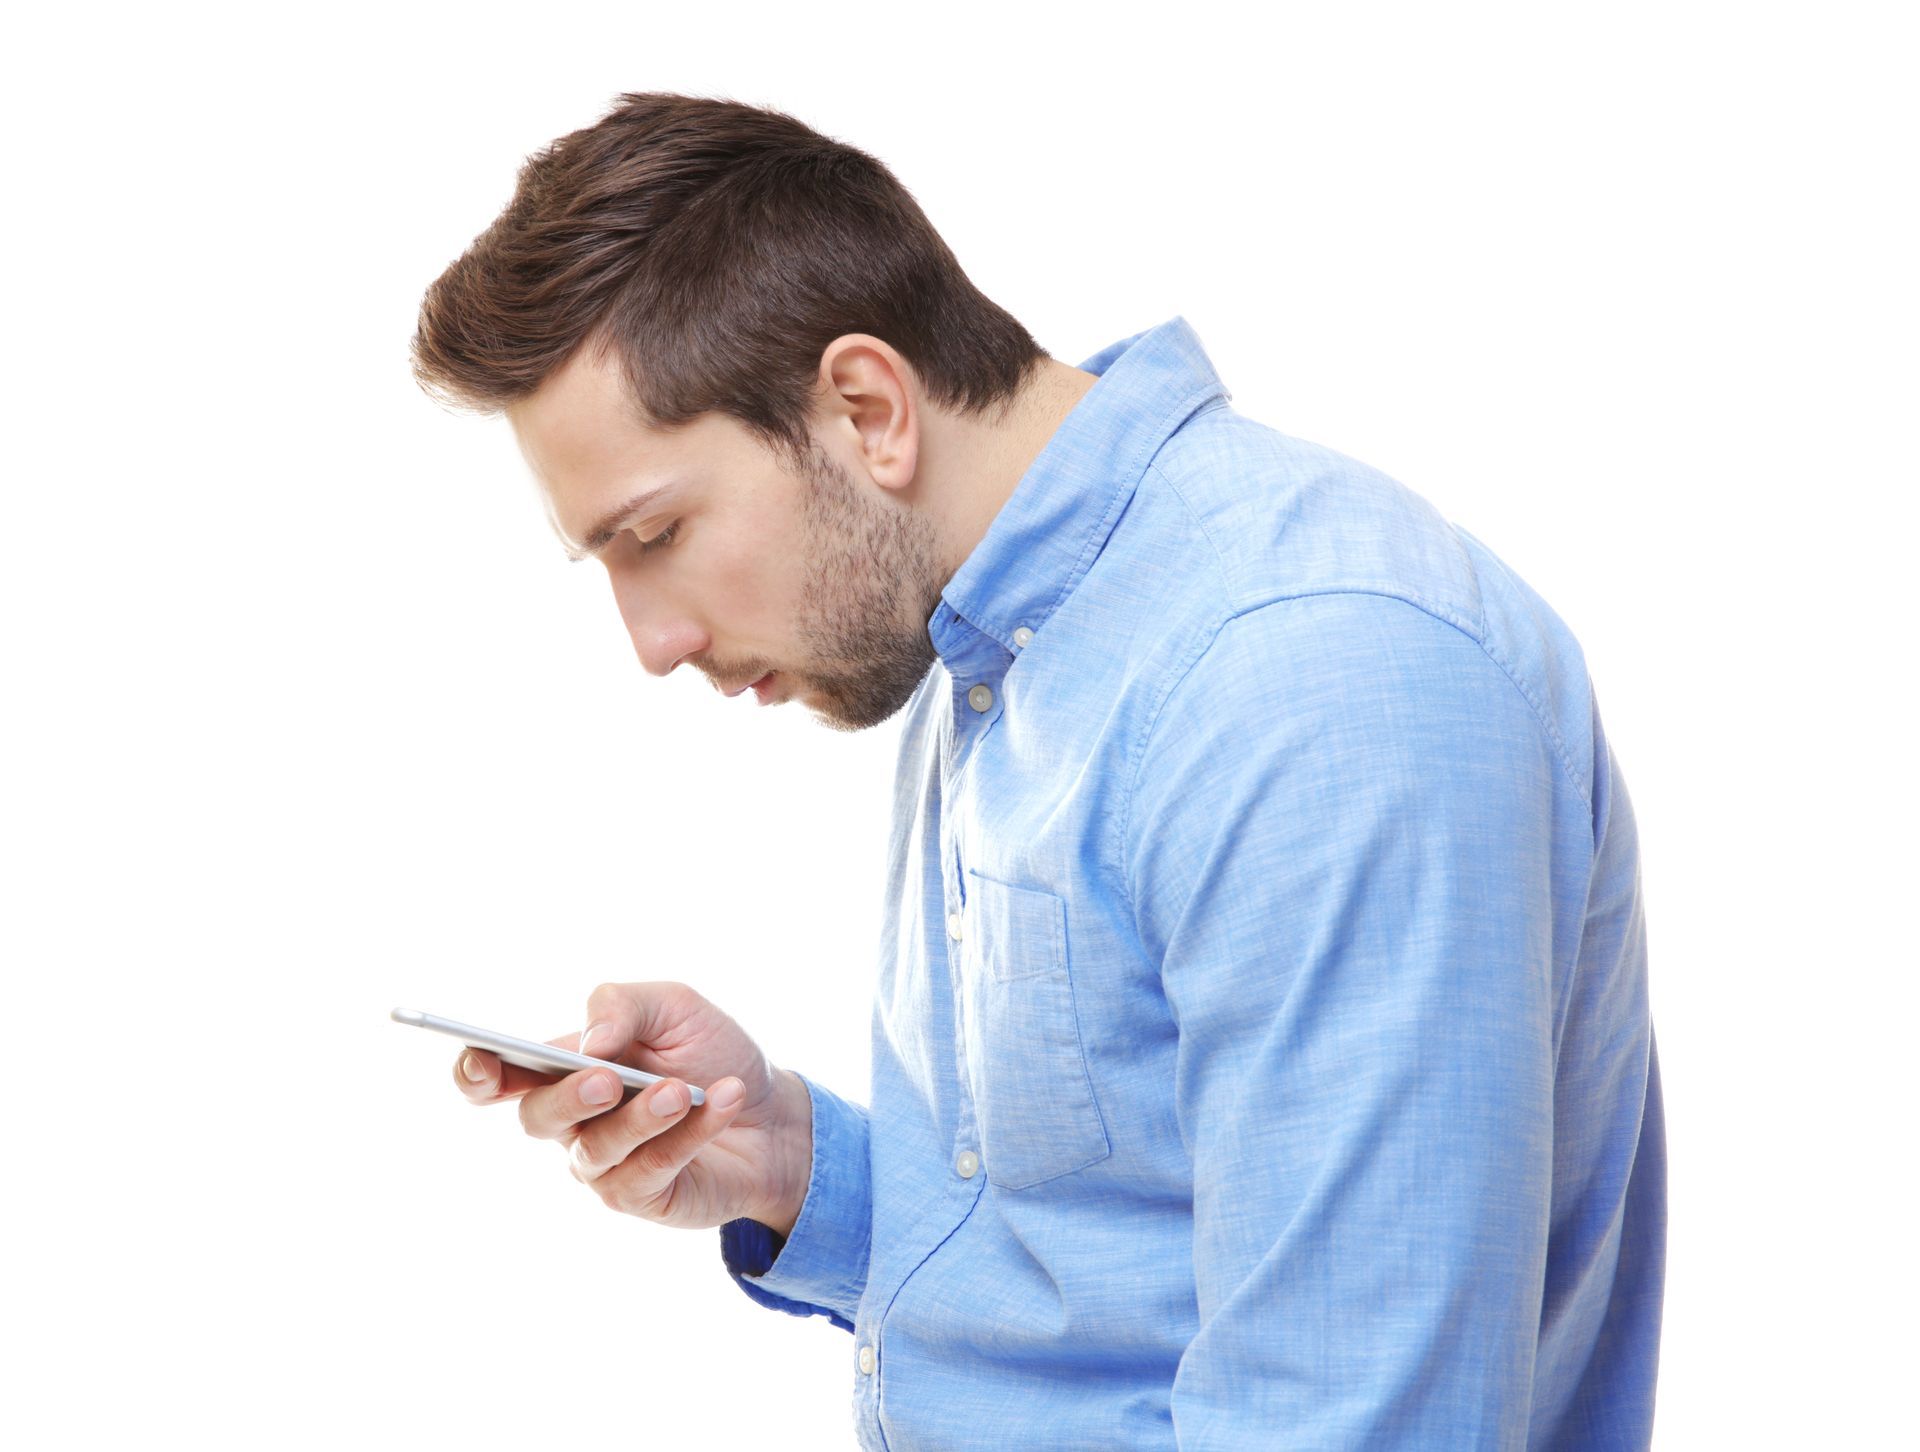 A young man holding a mobile phone in his right hand and looking down at the screen with a poor head and neck posture.